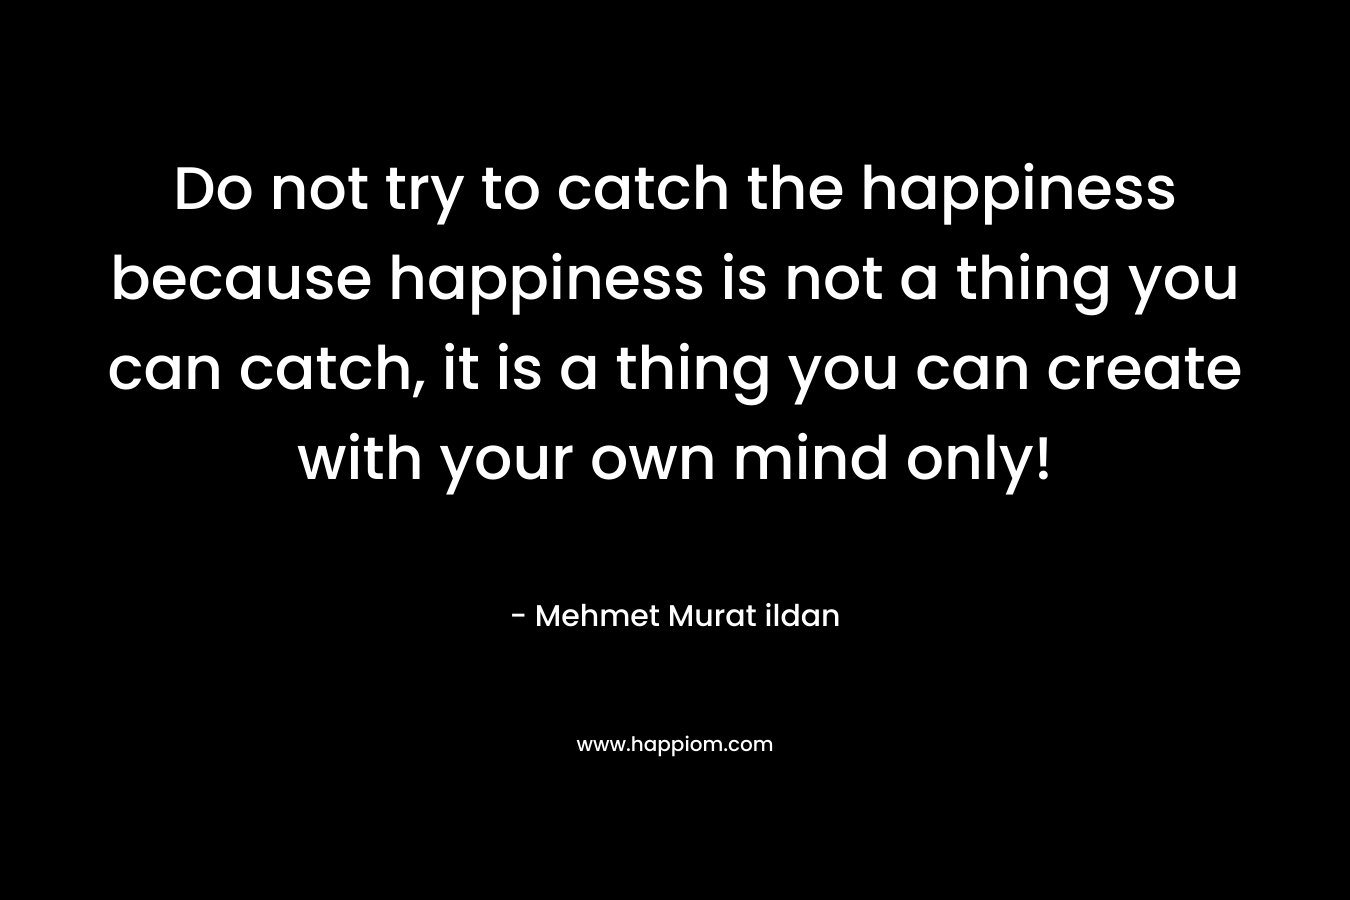 Do not try to catch the happiness because happiness is not a thing you can catch, it is a thing you can create with your own mind only!